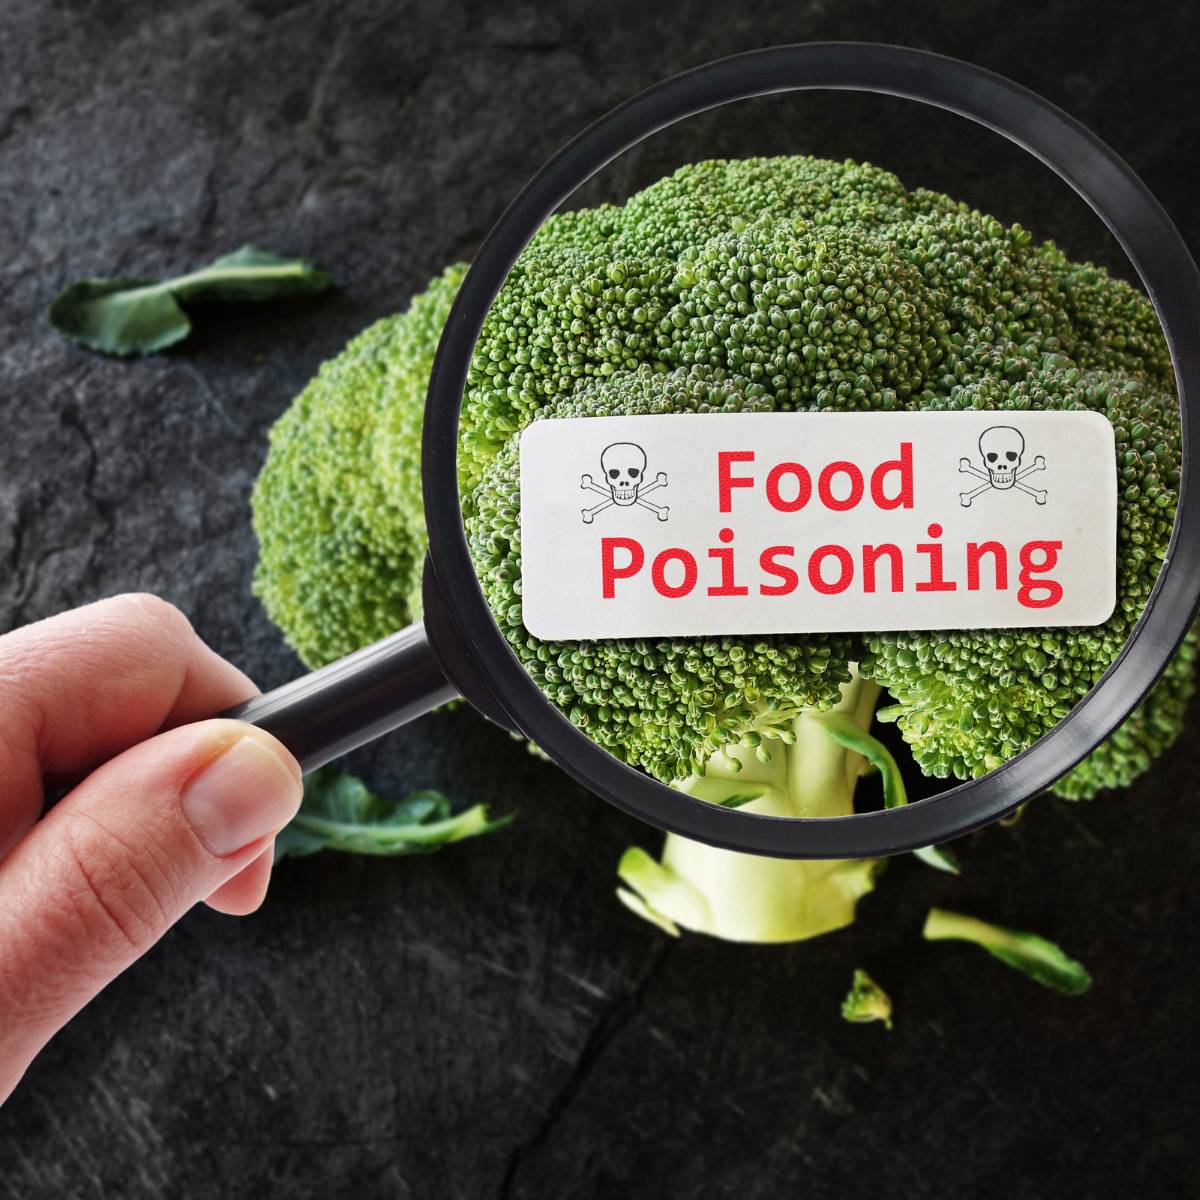 Food Poisoning referring to potential risks of eating raw tofu.